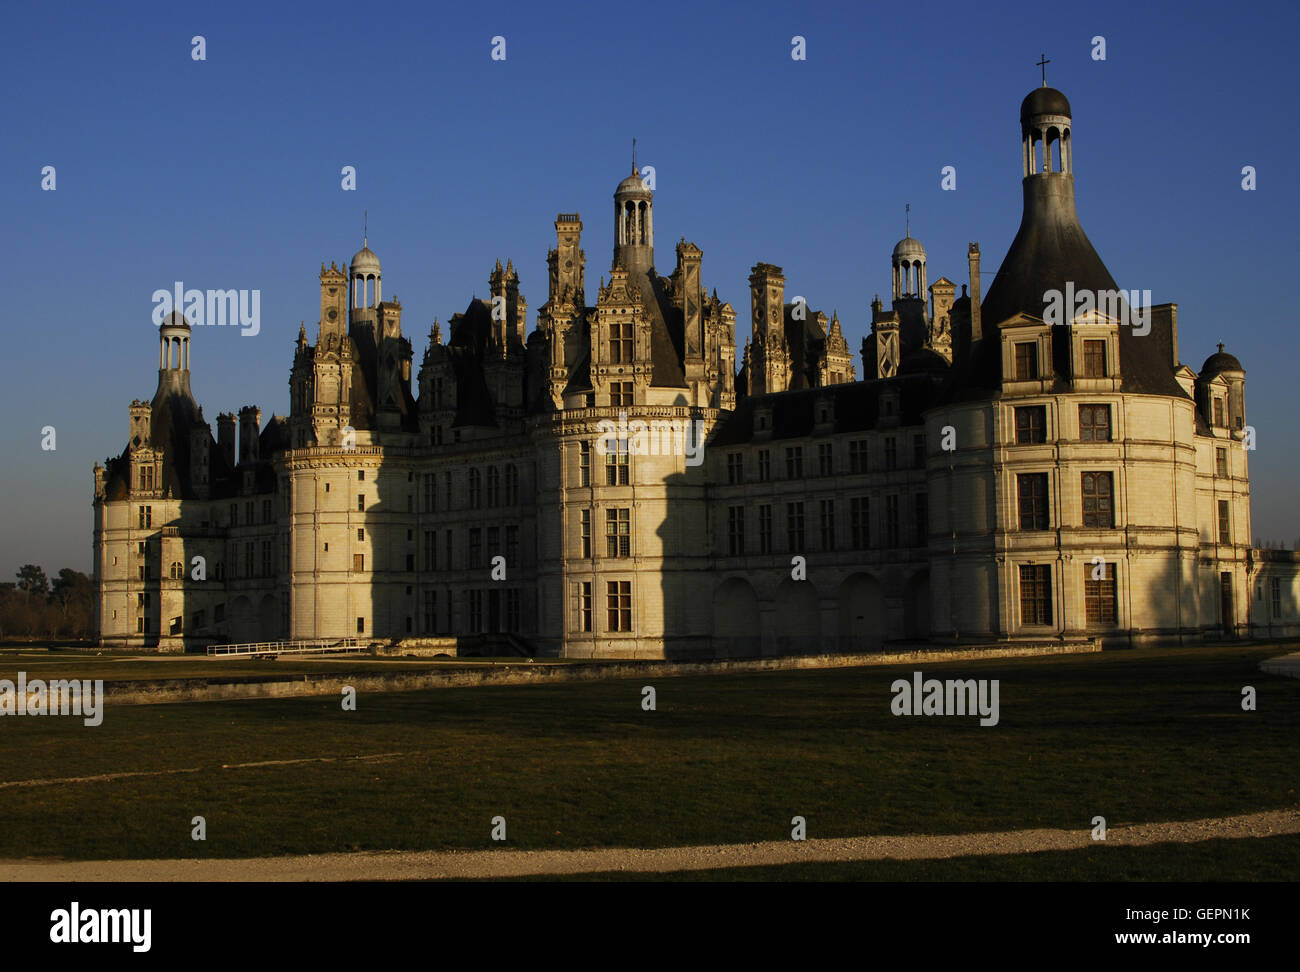 Renaissance Art. France. 16th century. Castle of Chambord. Attributed to Domenico da Cortona  (ca 1465- ca 1549). Built by order of King Francis I between 1519-1539, along the river Closson. Exterior. Northwest façade. Loire Valley. Stock Photo